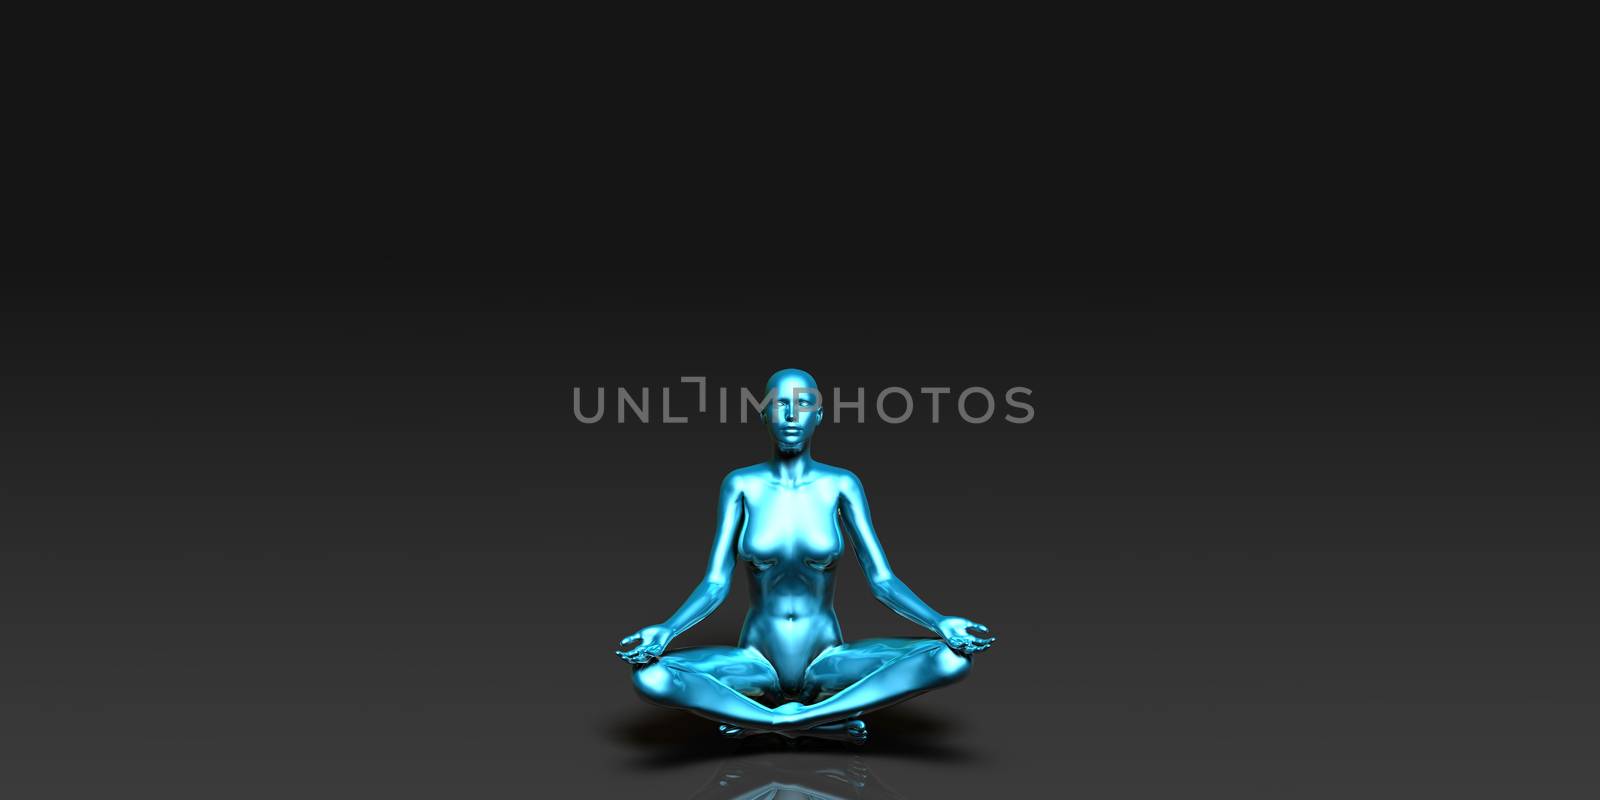 The Lotus Position Yoga Pose by kentoh